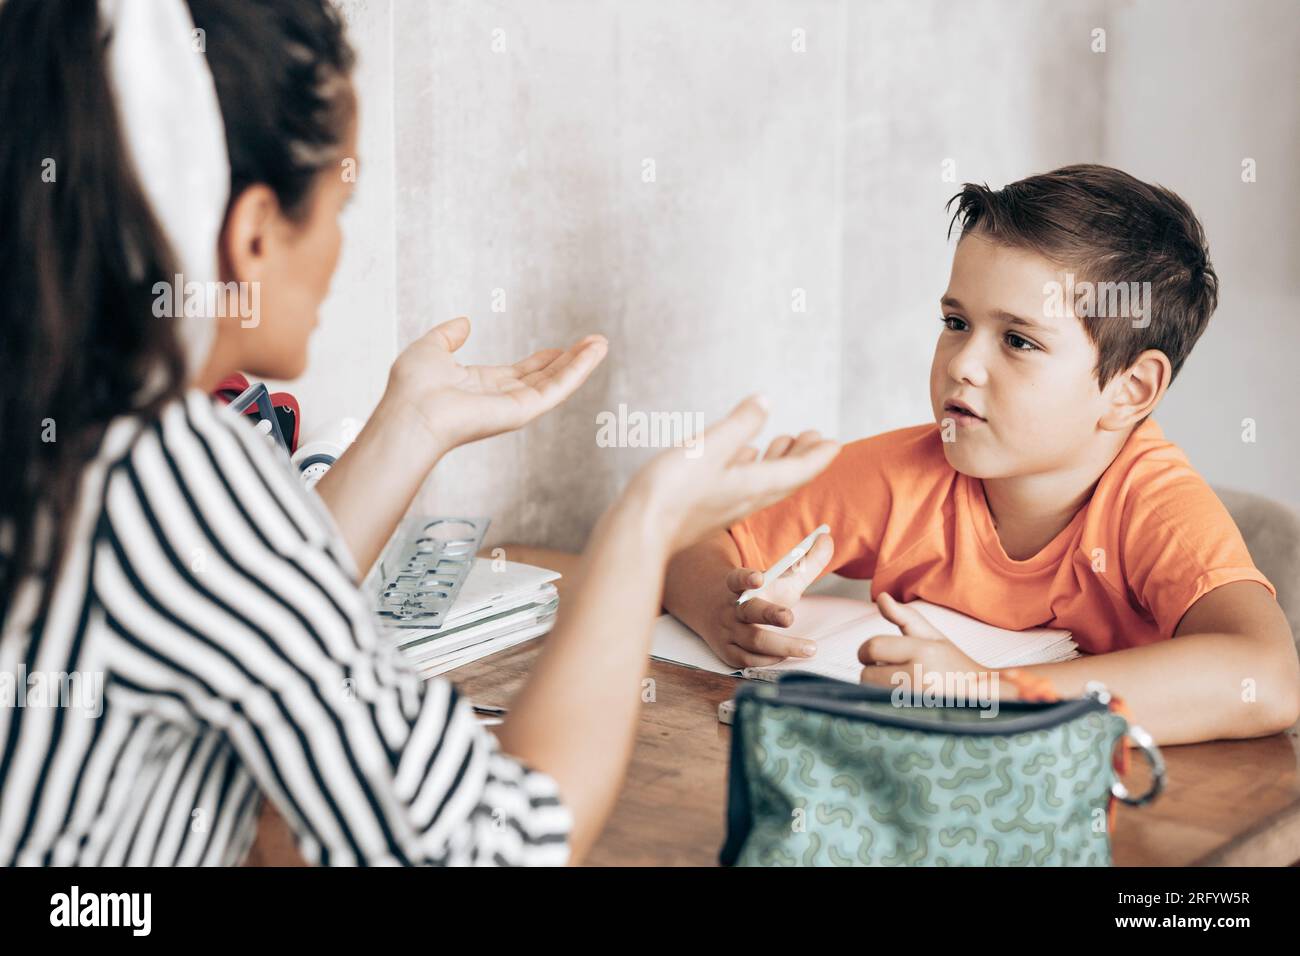 Little school boy doing homework with his mom helping him Stock Photo